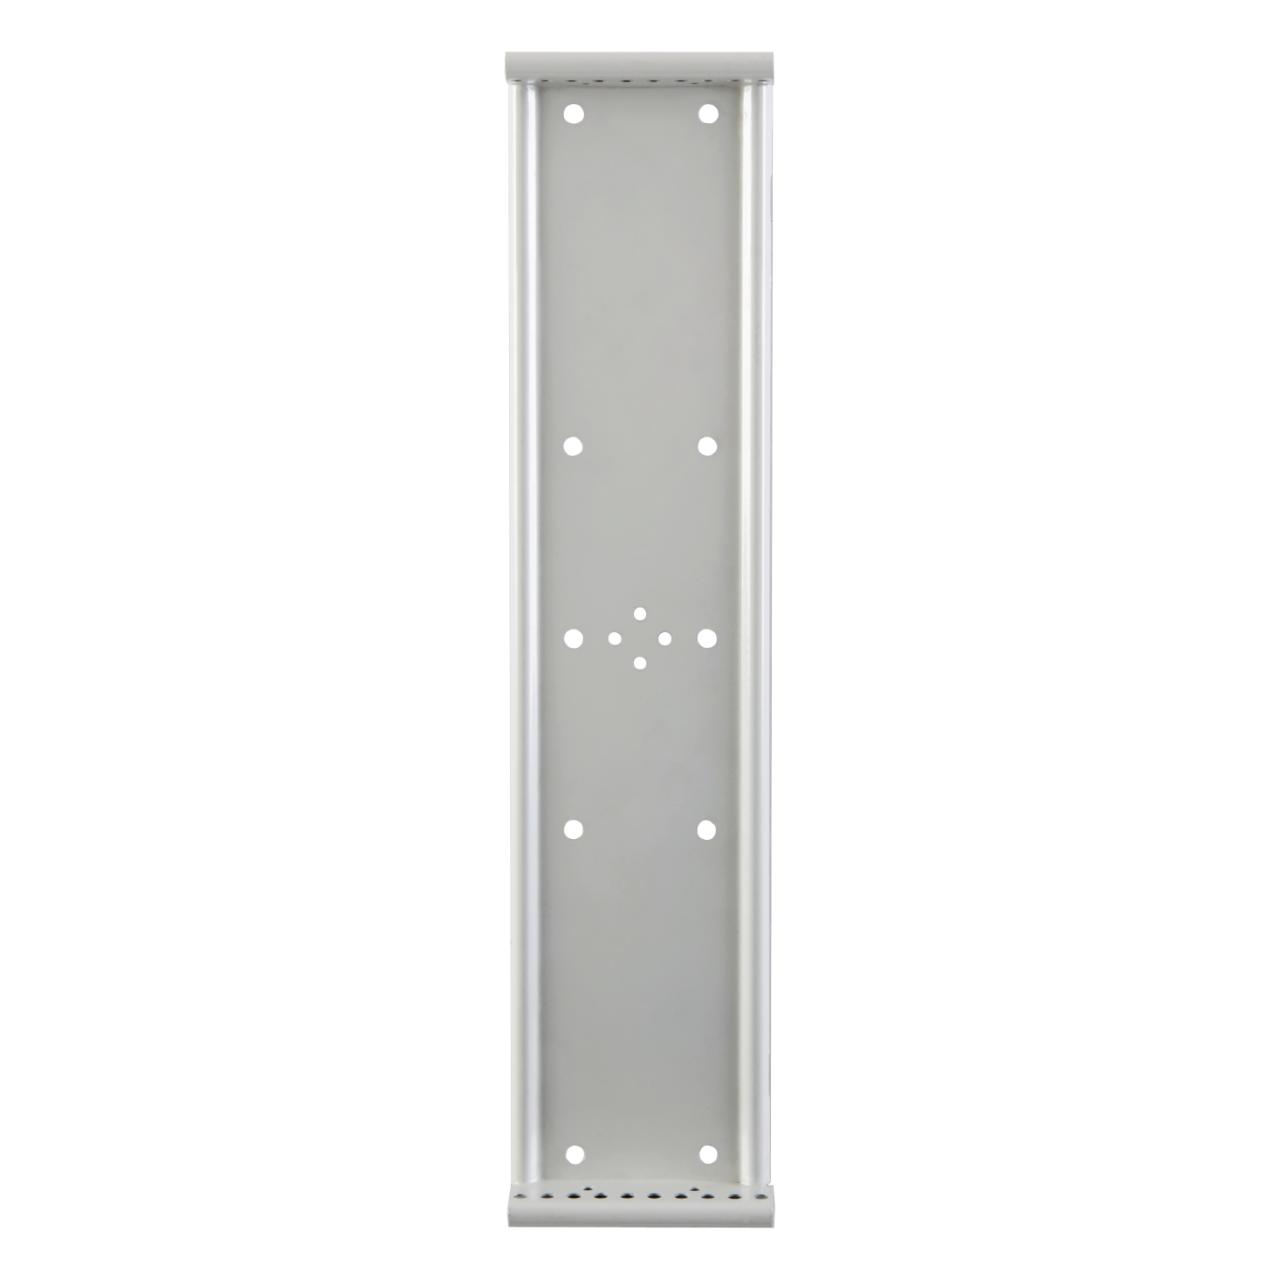 Empty Tarifold Metal Wall Display Unit, A4, for 10 Pockets, without Side Stops